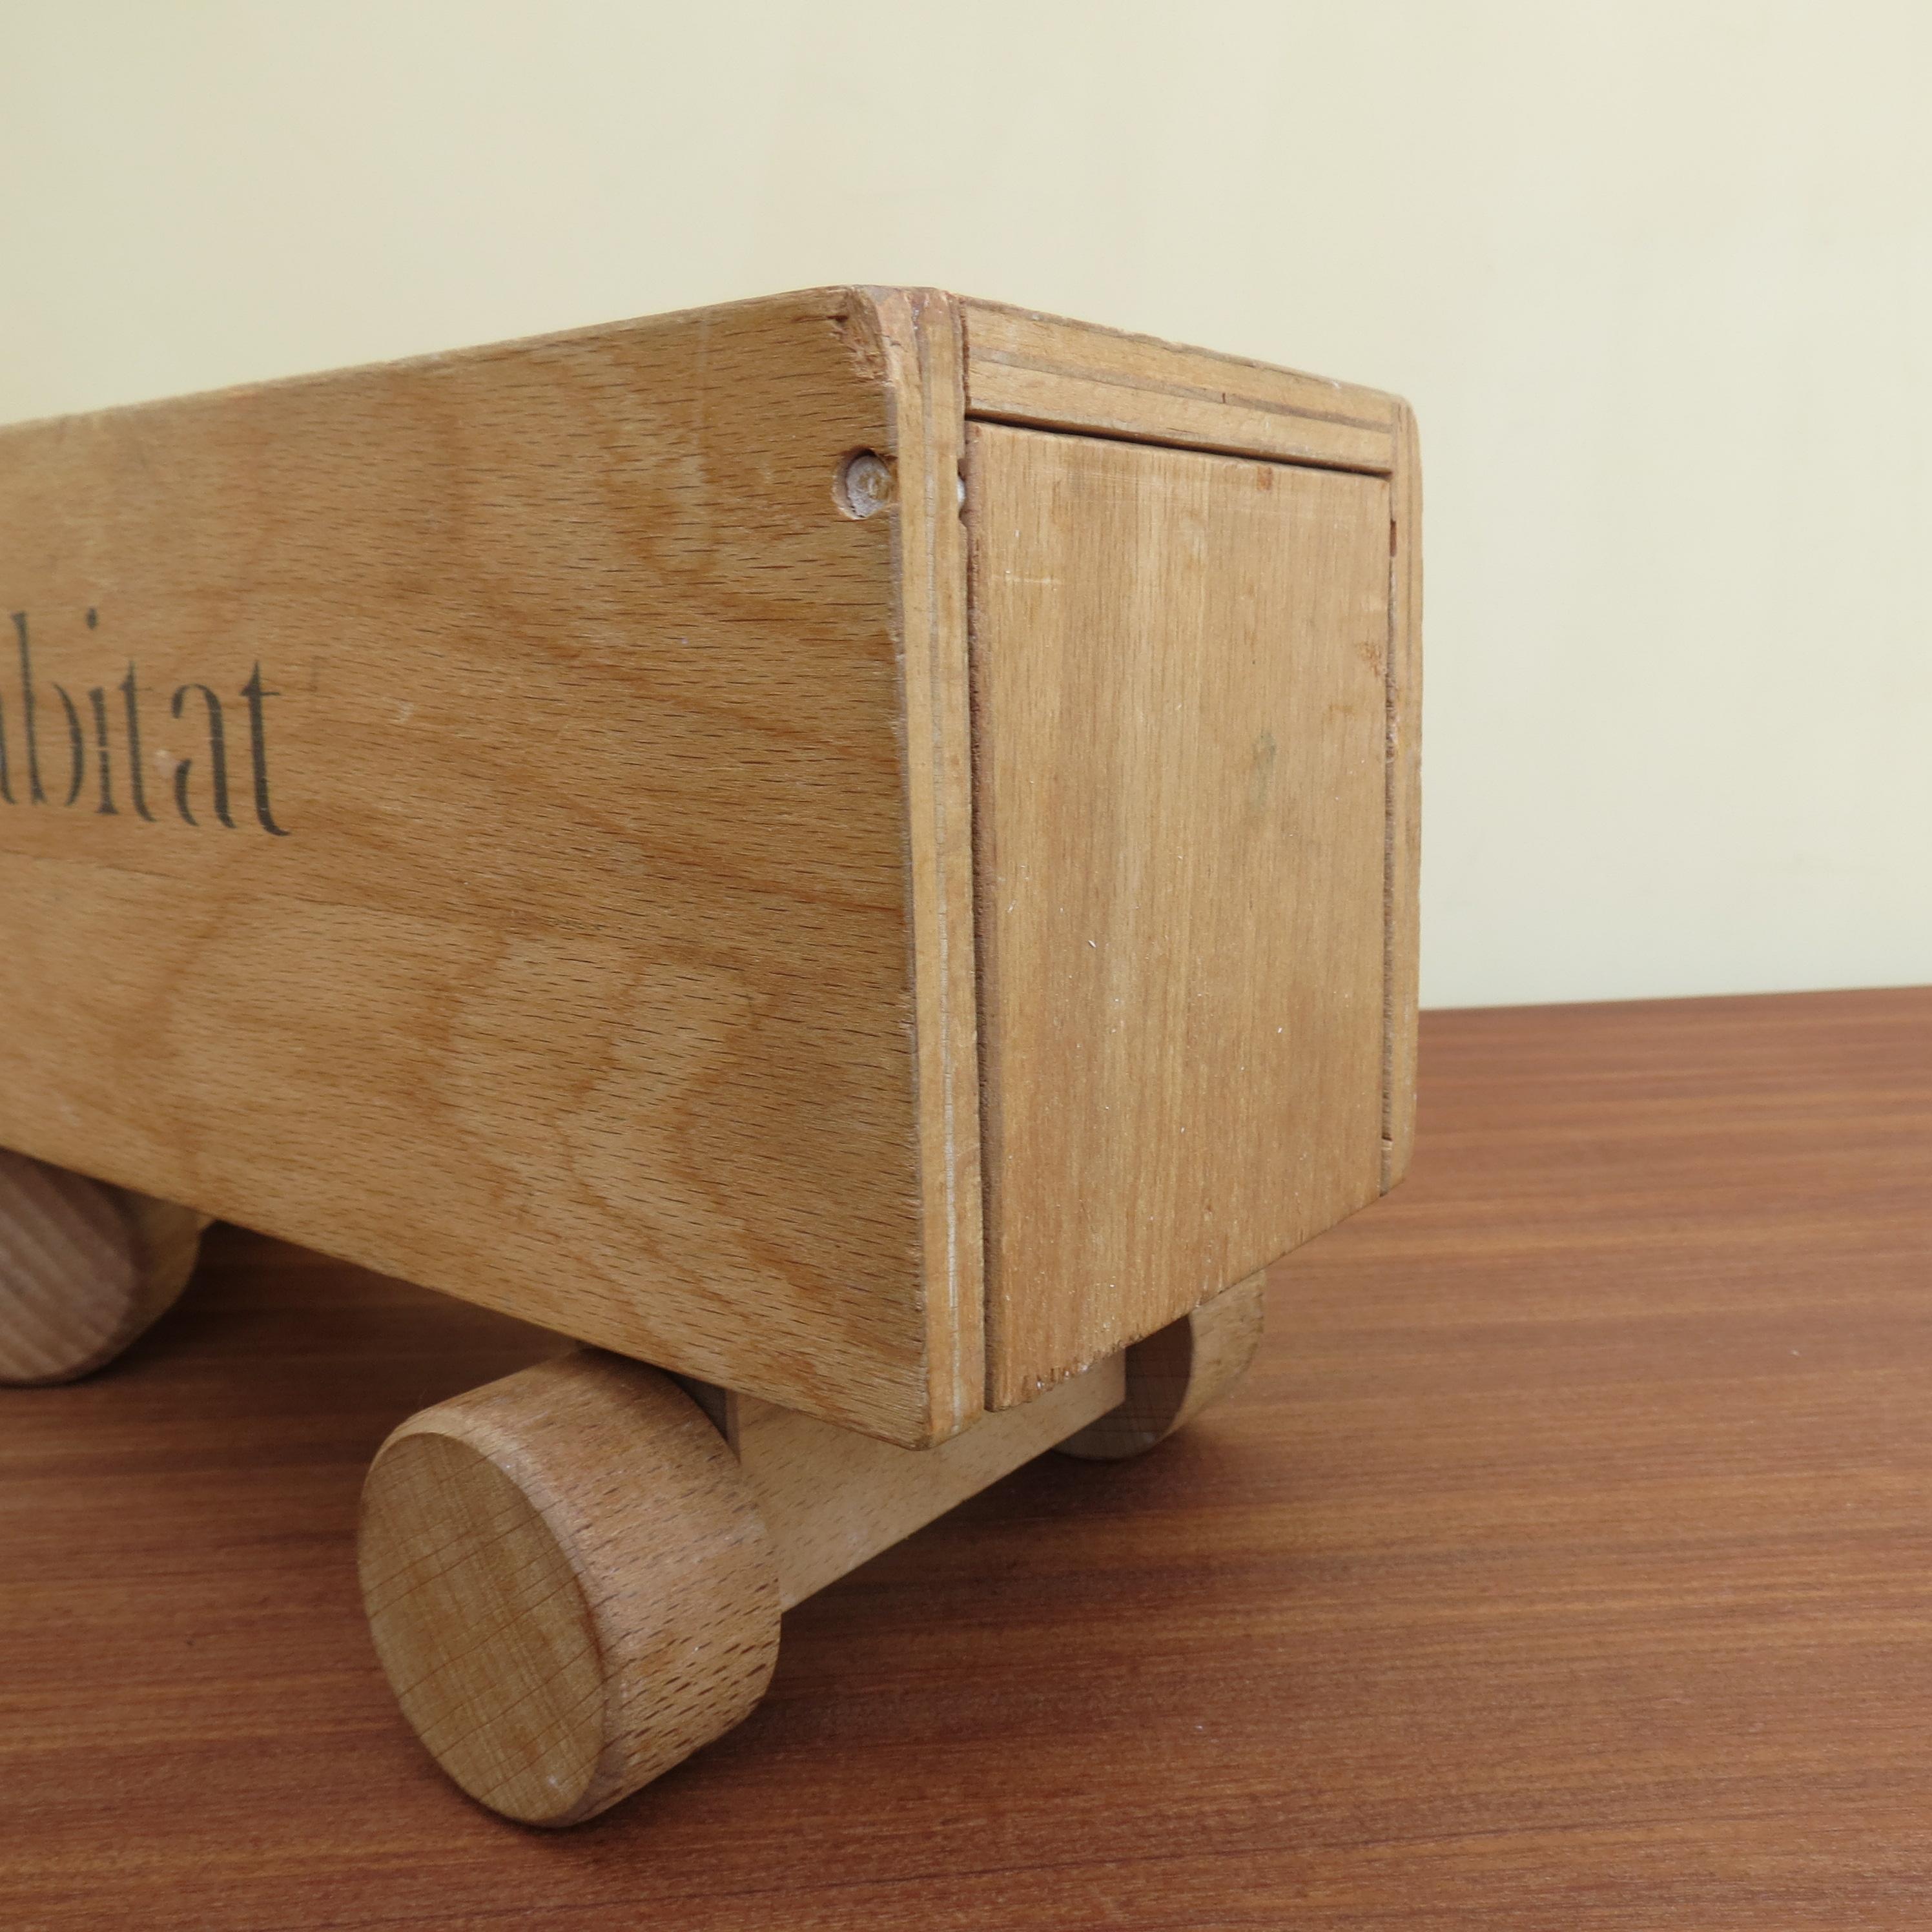 Machine-Made 1970s Vintage Advertising Toy Lorry for Habitat Wooden Toy Lorry by Ryk Heuff